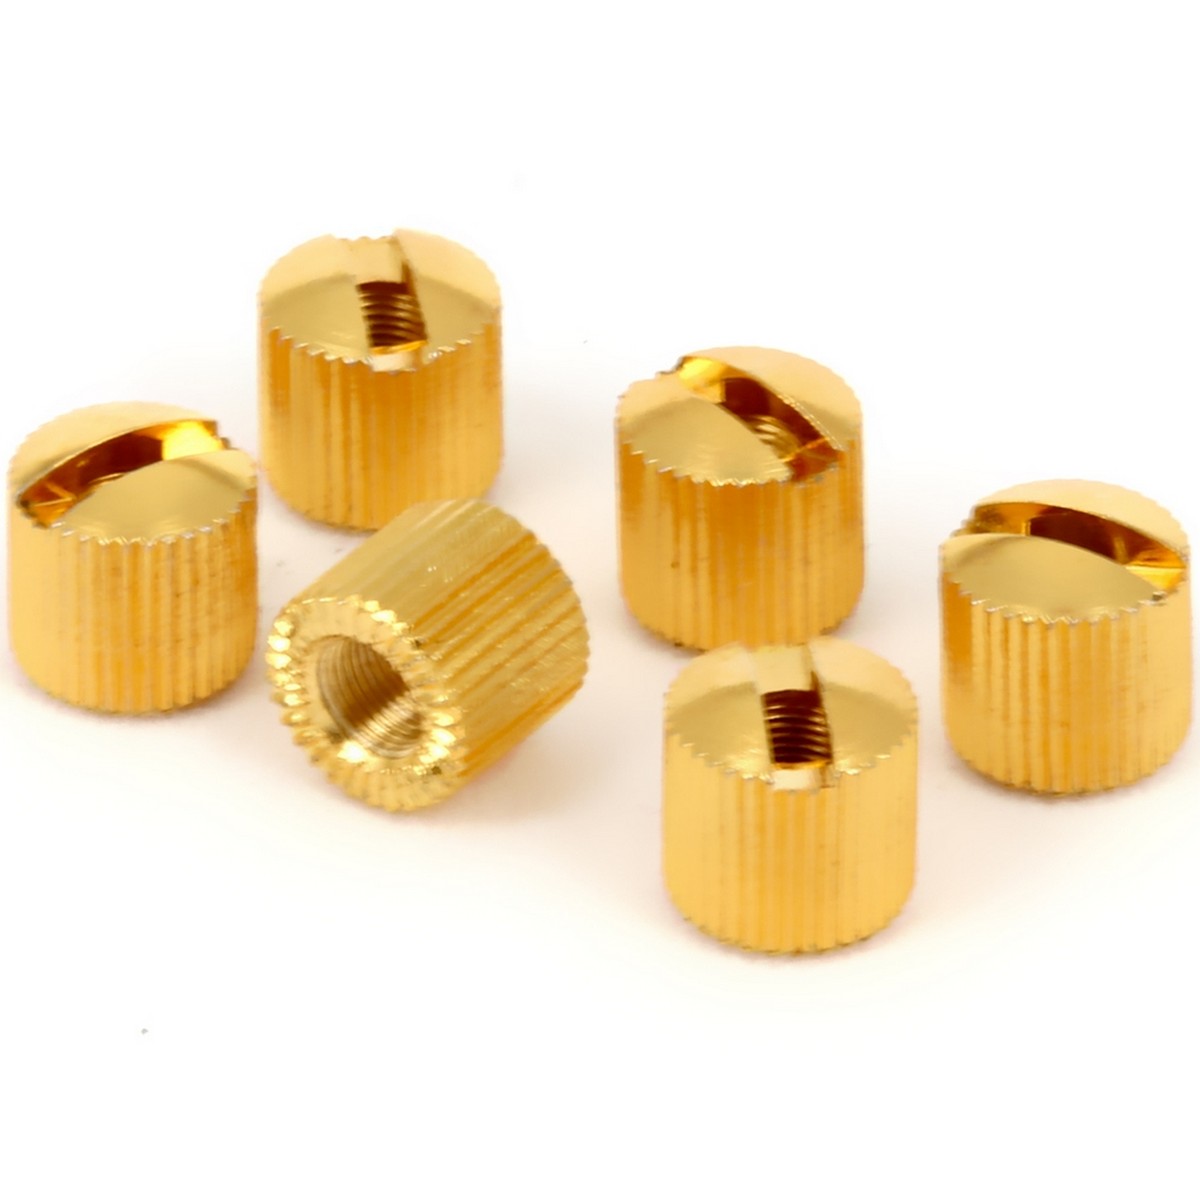 Tronical Lock Nuts | Nuts for TronicalTune RoboHeads Gold Set of 6